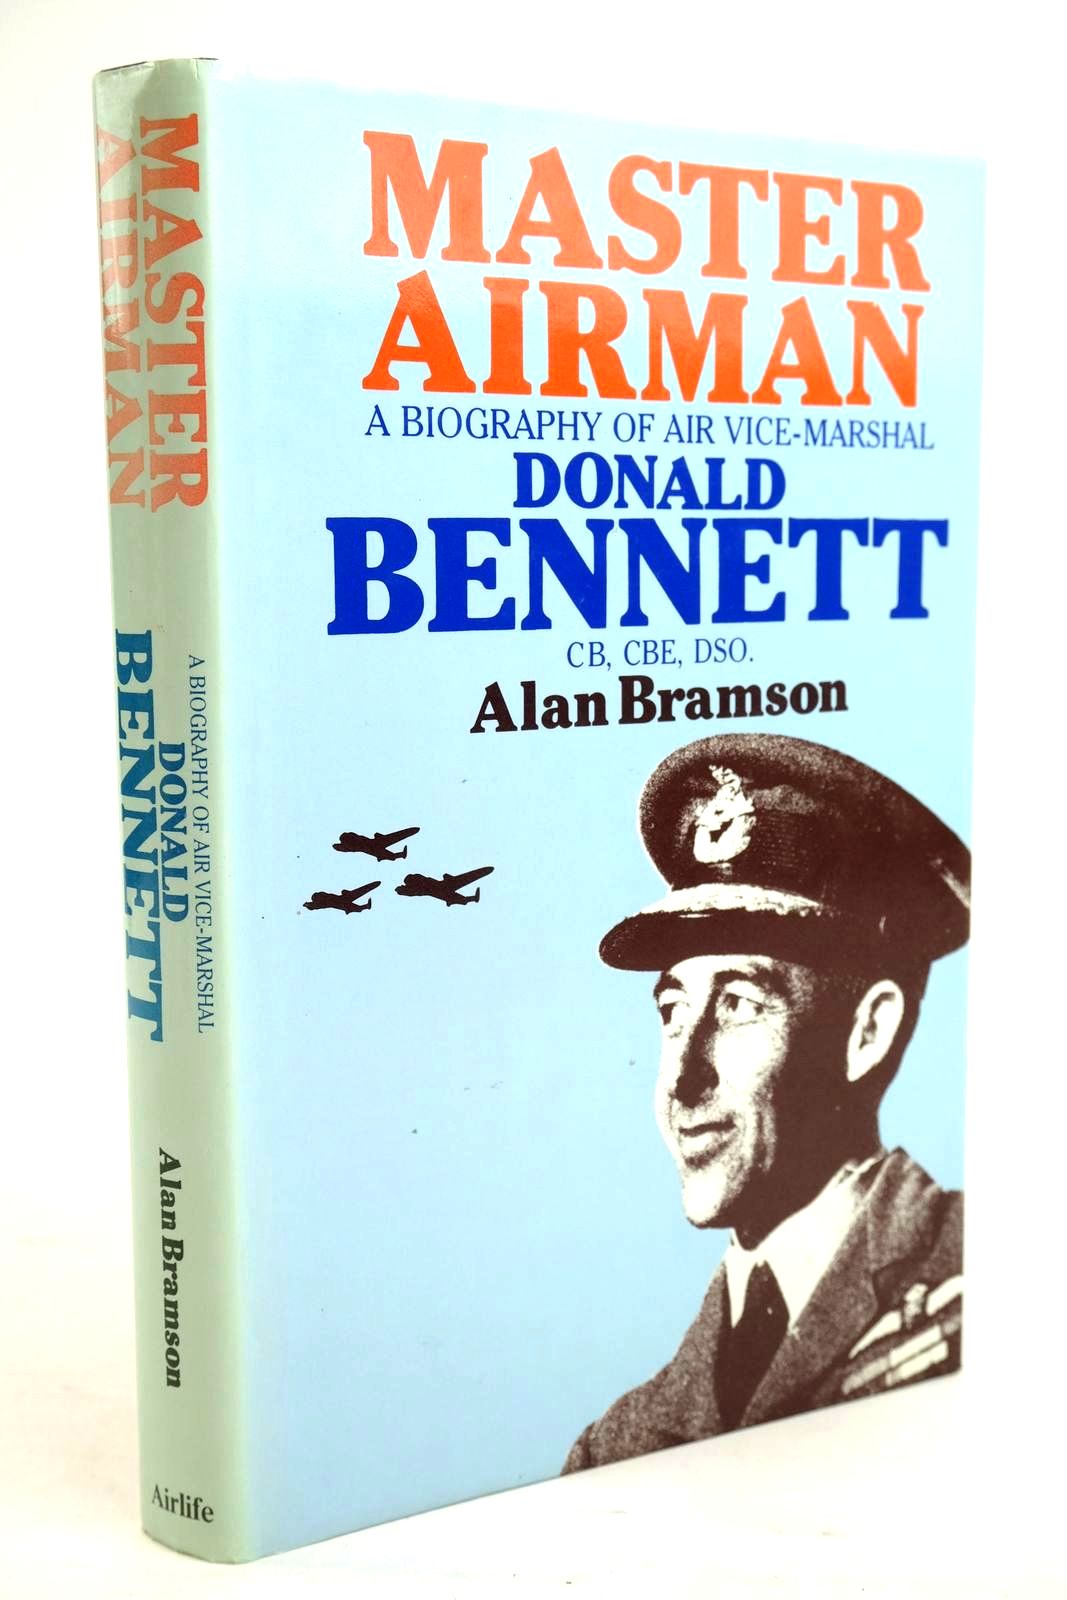 Photo of MASTER AIRMAN written by Bramson, Alan published by Airlife (STOCK CODE: 1320219)  for sale by Stella & Rose's Books